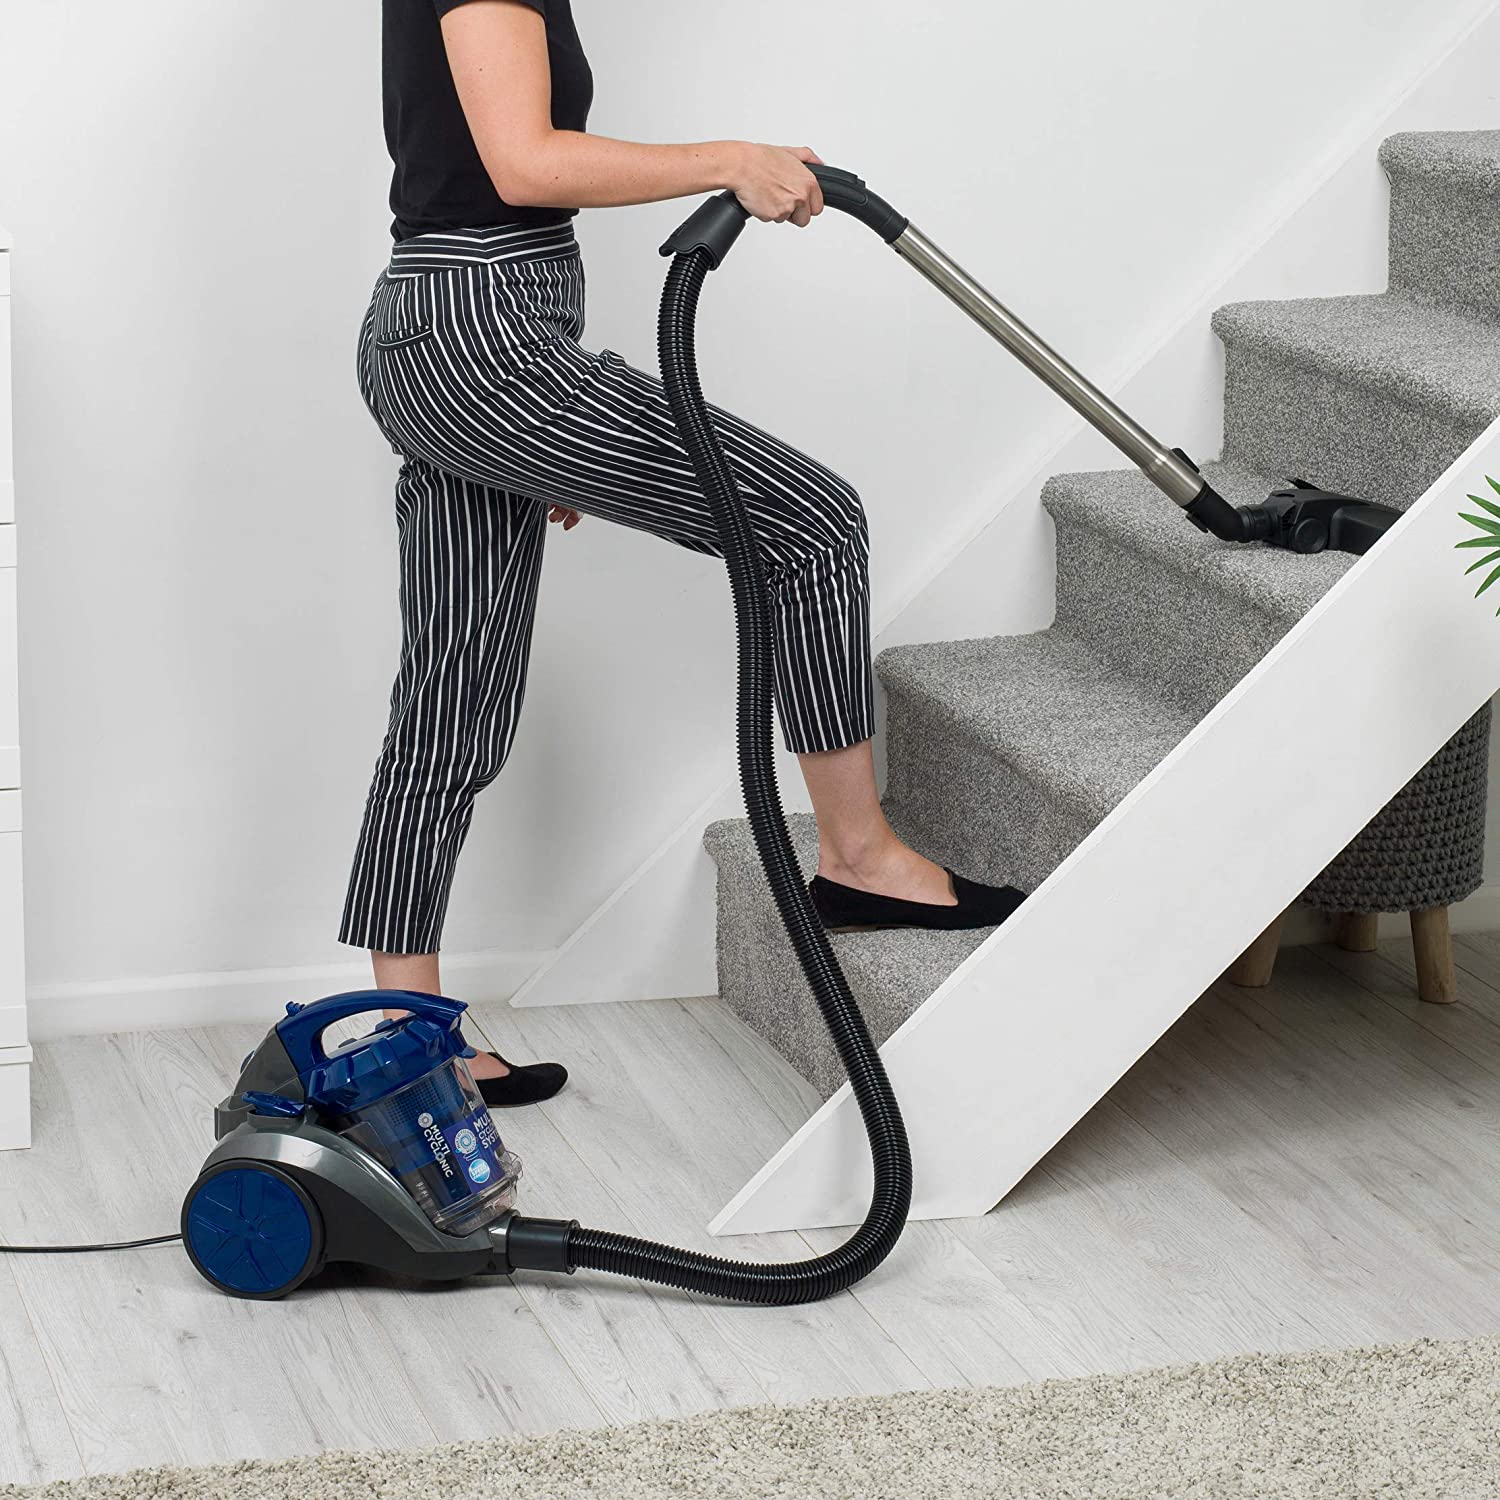 Beldray BEL0371V2, Vacuum cleaner Reviews and Comments